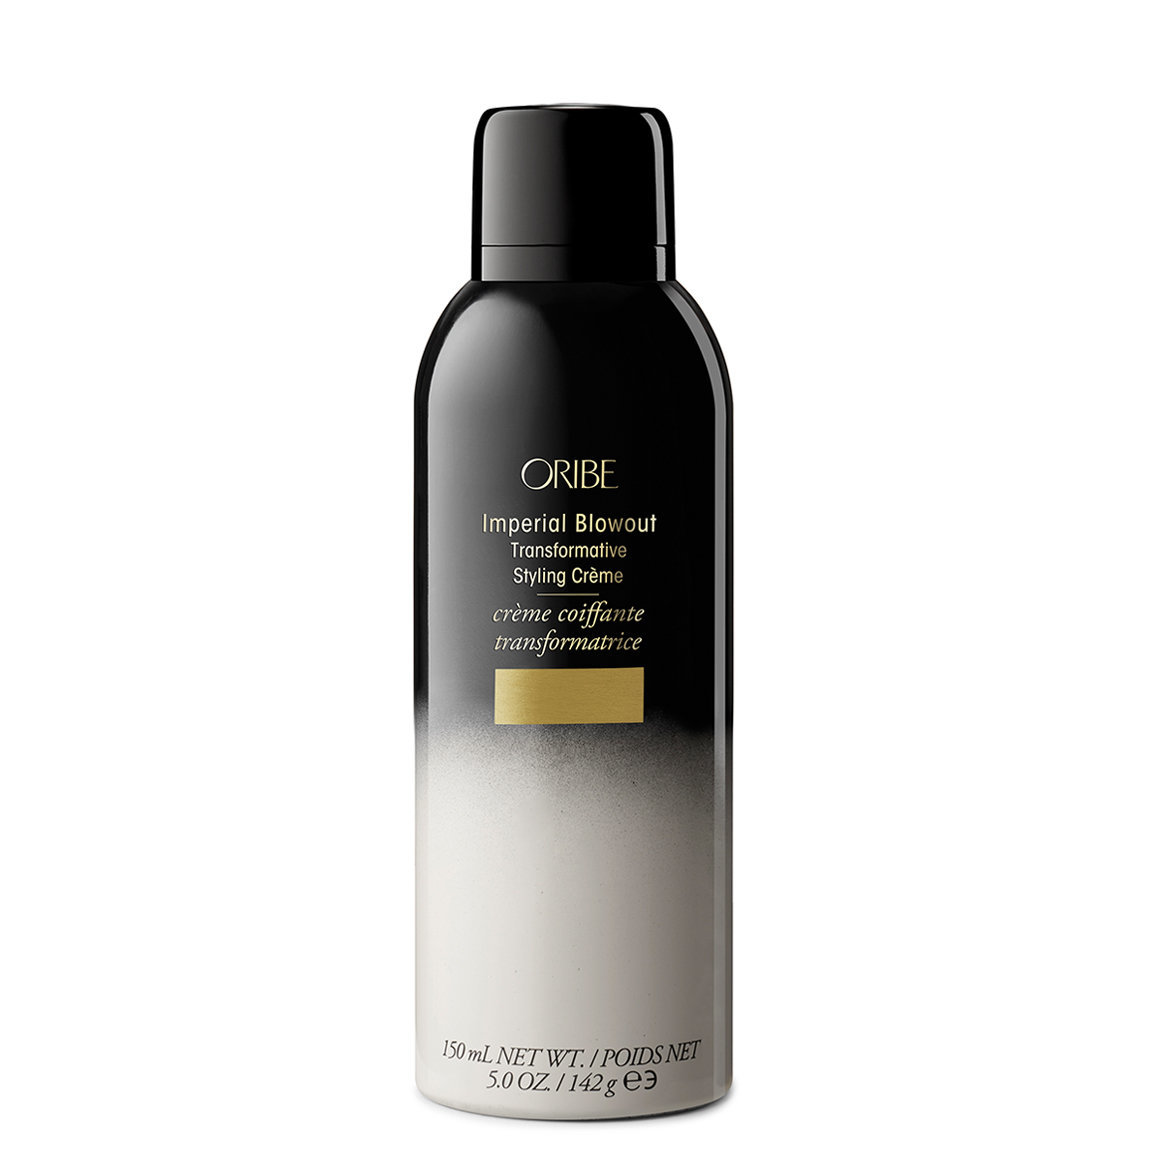 Oribe Imperial Blowout Transformative Styling Crème alternative view 1 - product swatch.